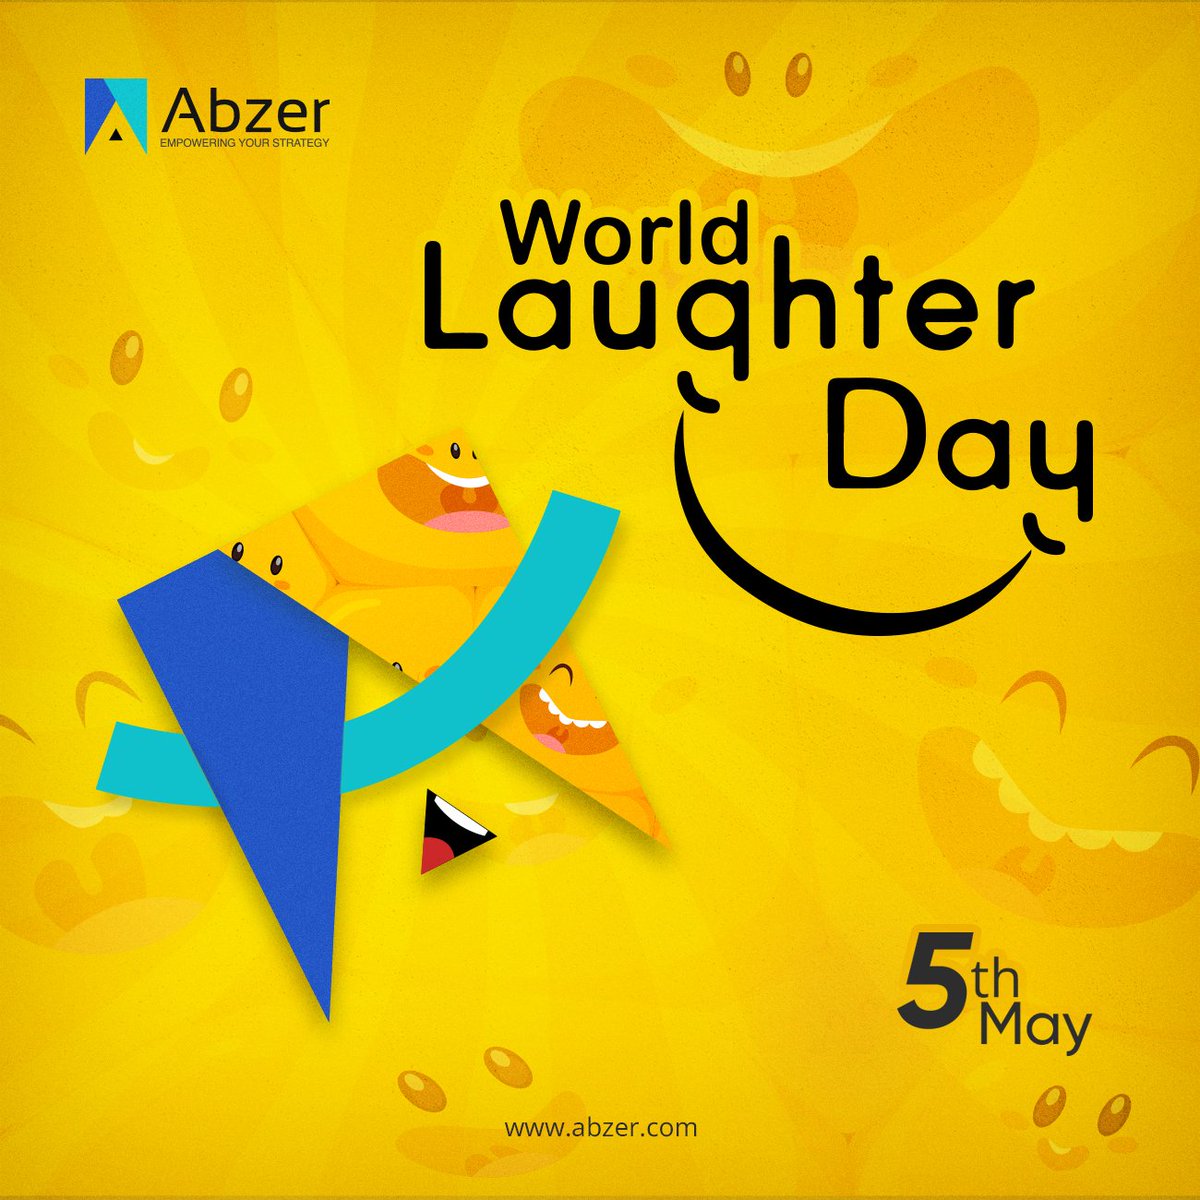 A reminder that a little bit of laughter can go a long way in brightening your day and the lives of those around you. Happy World Laughter Day!

#WorldLaughterDay #HappyLaughterDay  #AbzerDMCC